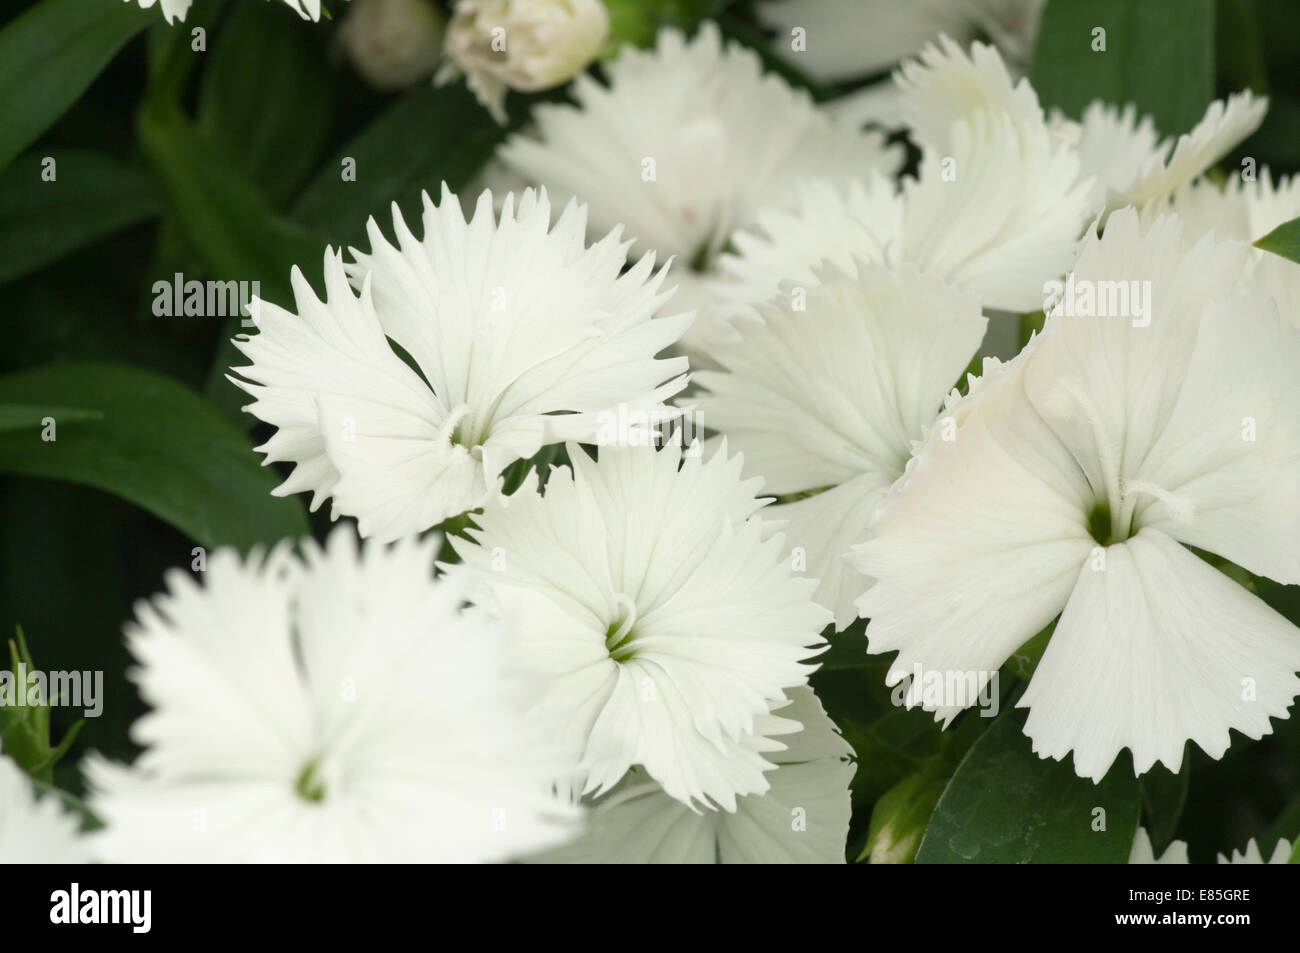 White Dianthus Commonly Known as Pinks Stock Photo